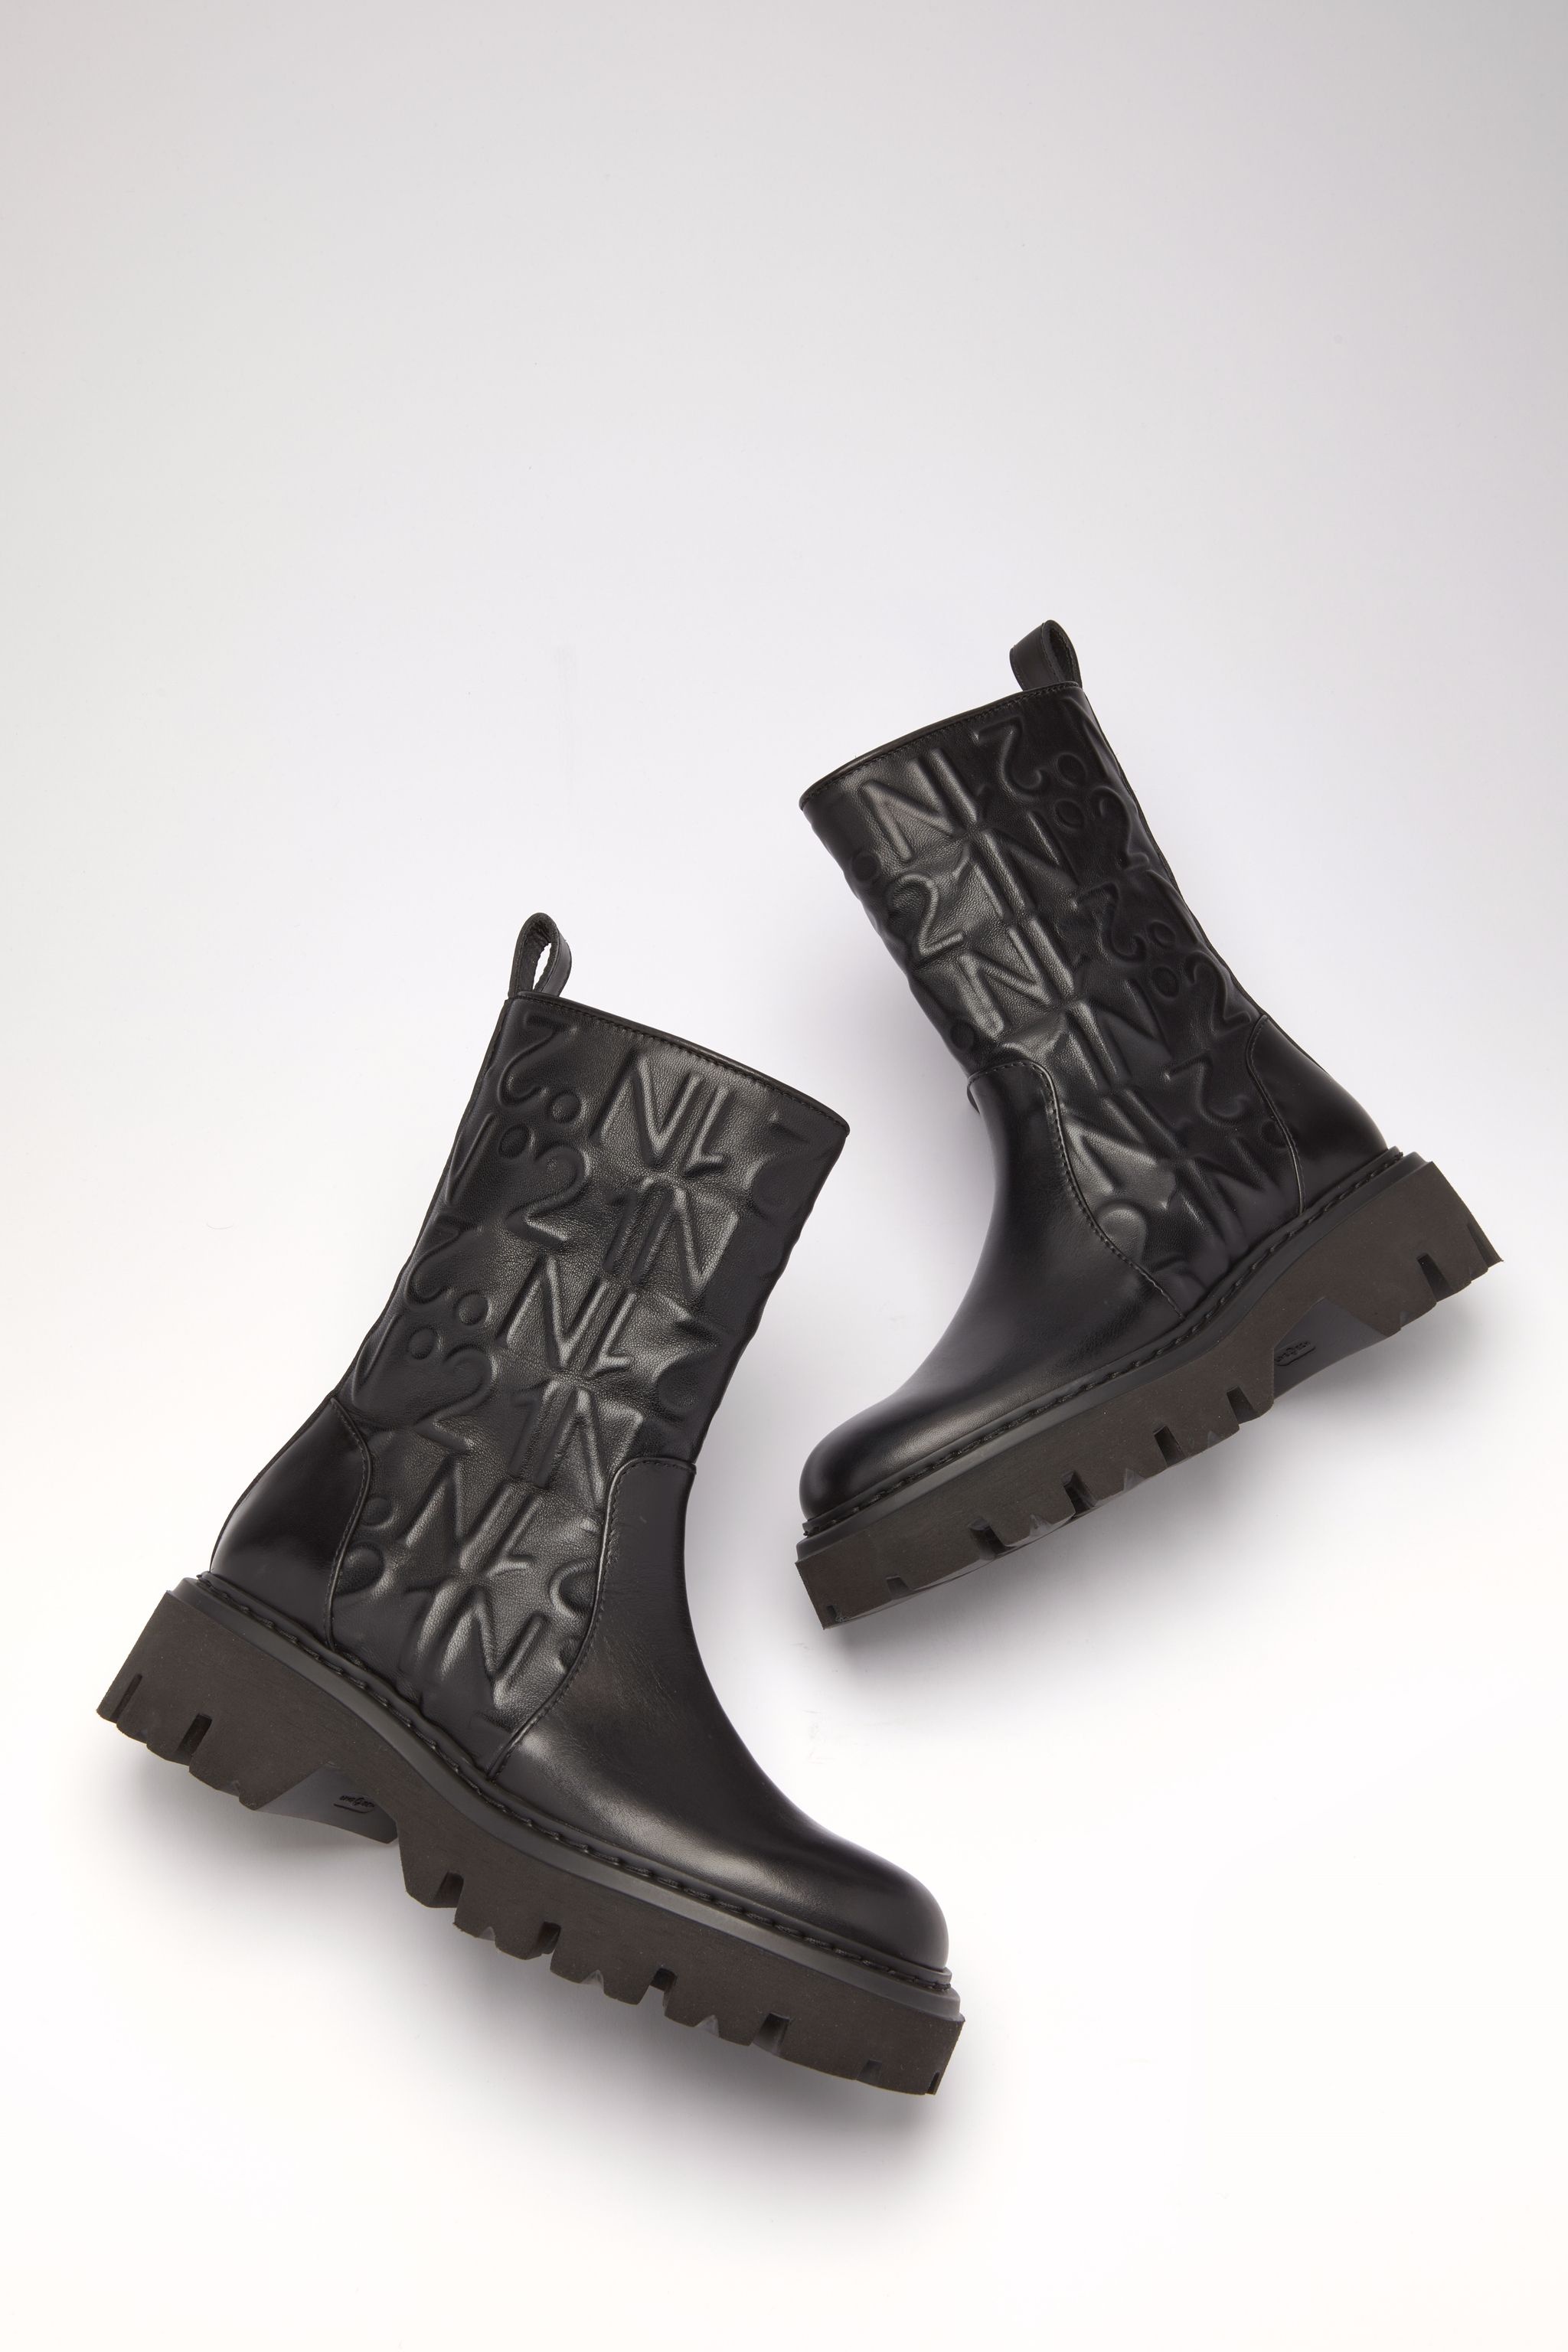 LOGO-EMBOSSED BOOTS - 4